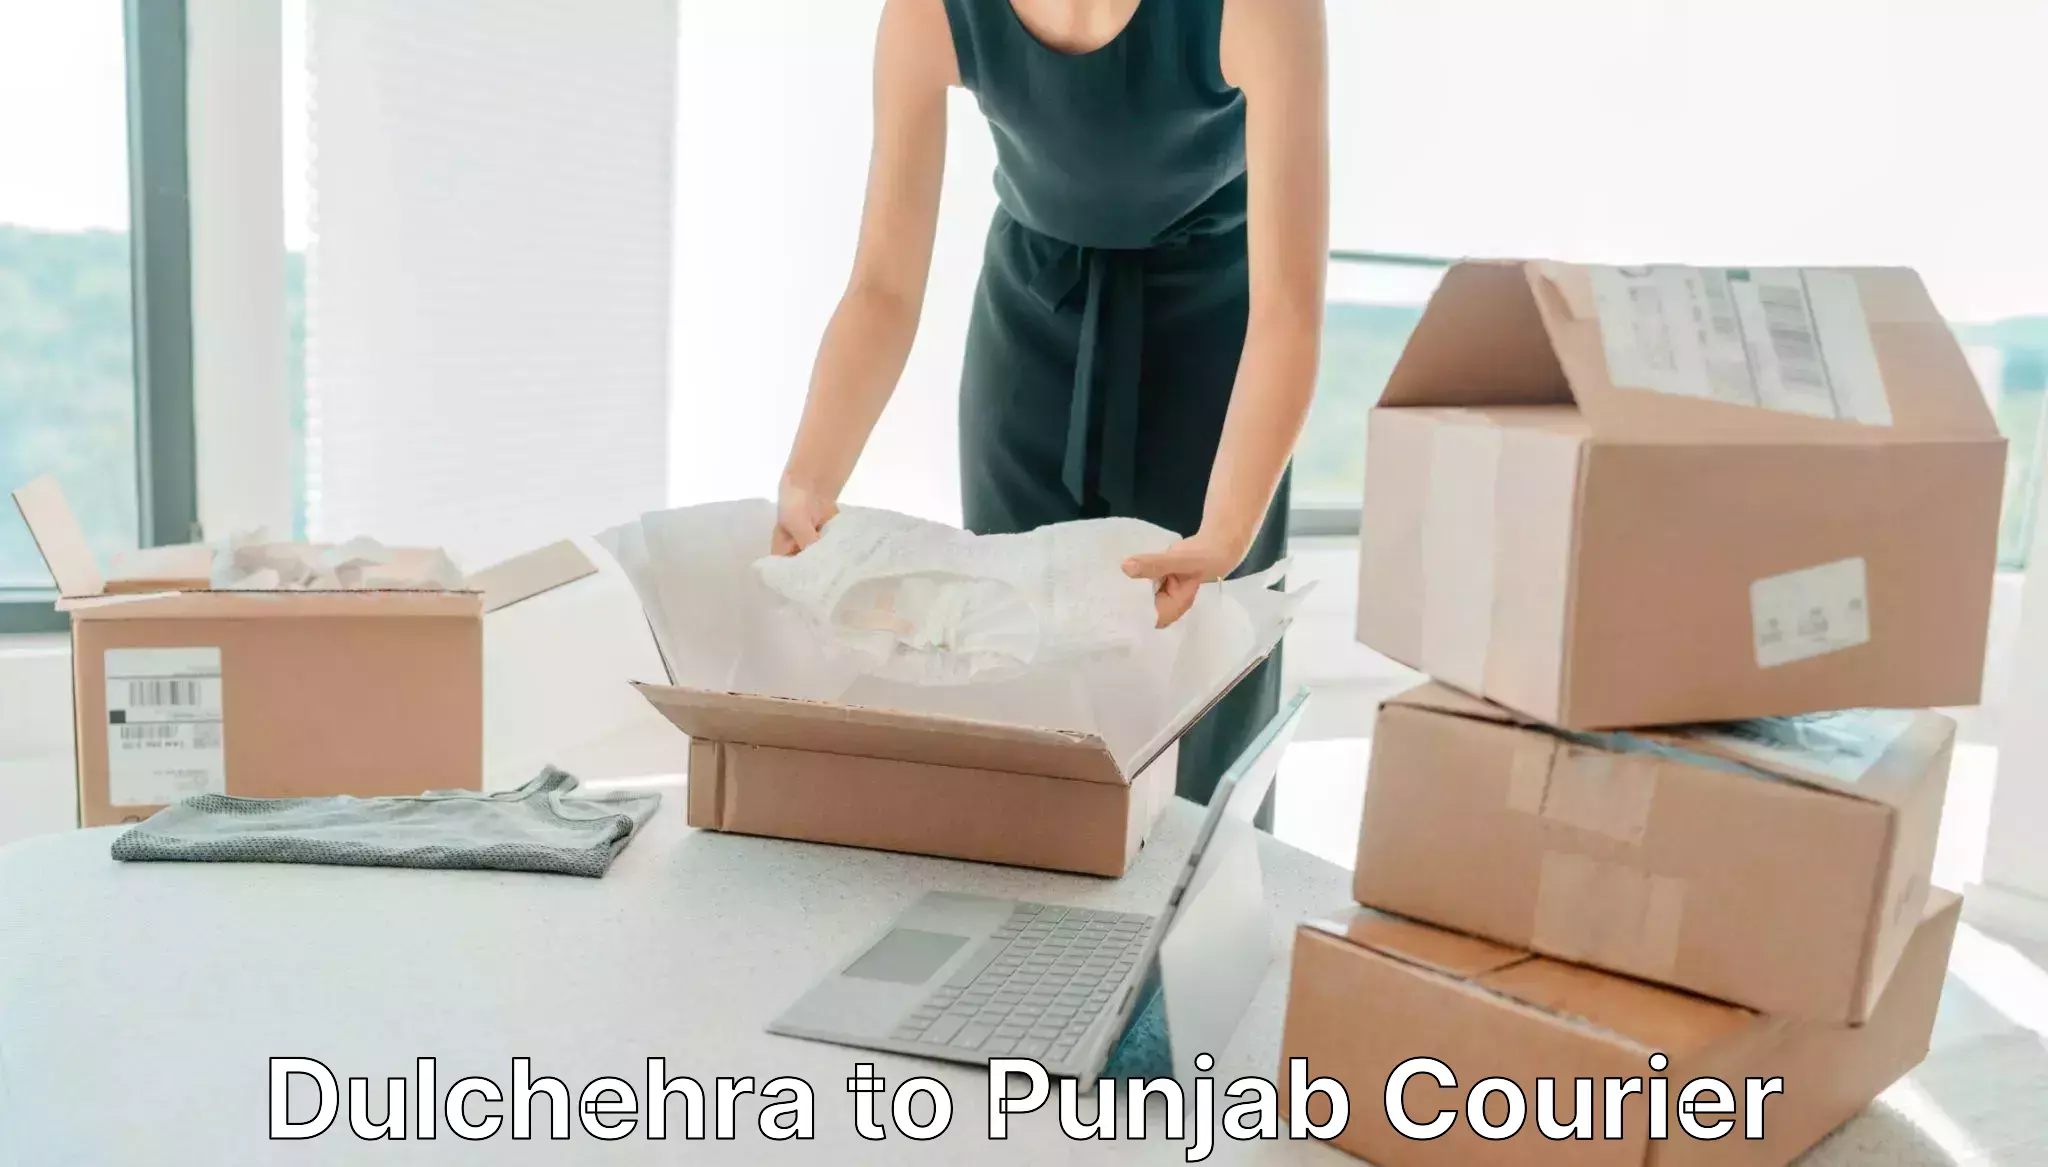 Professional courier services Dulchehra to Firozpur